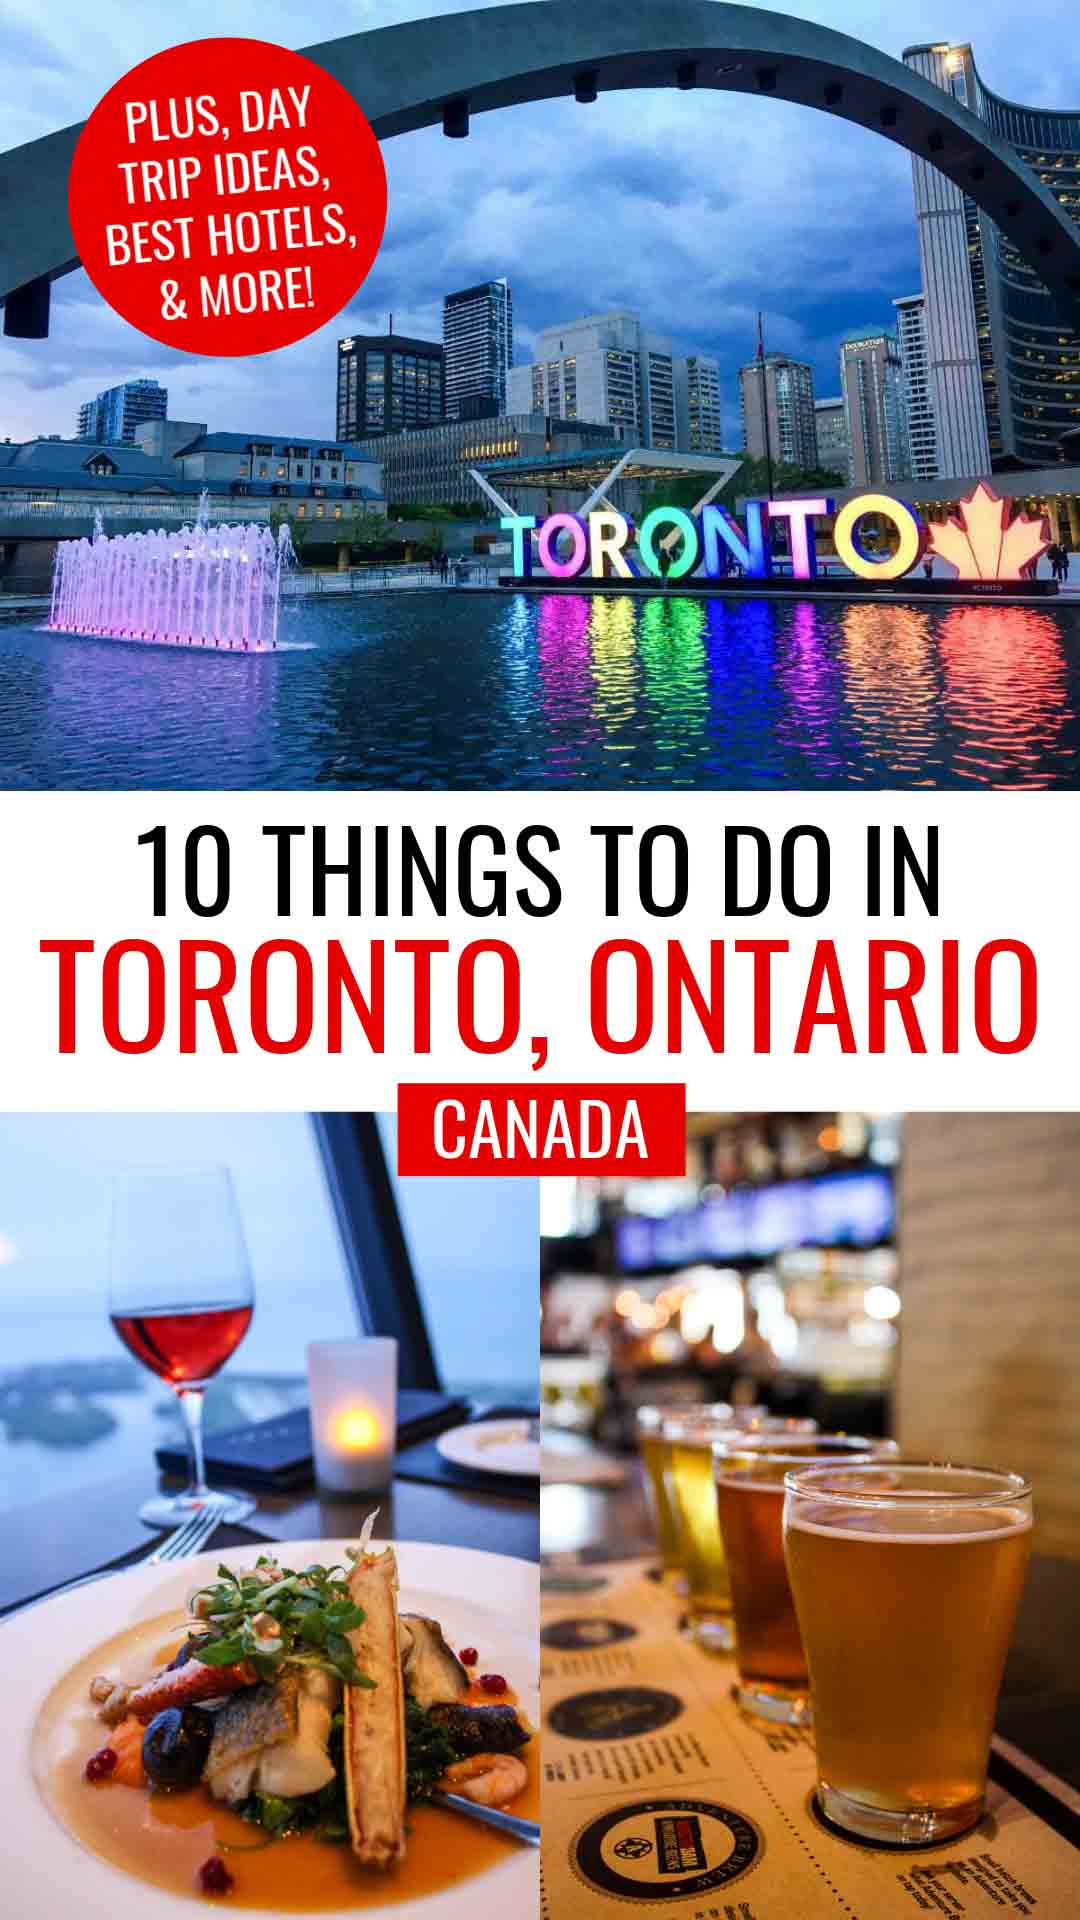 10 Things to do in Toronto, Ontario, Canada collage with 3-D Toronto Sign circa 2017 in Nathan Phillips Square, Fogo Island seafood dish and Canadian rosé wine at 360 The Restaurant at the CN Tower, and craft beer flight at Amsterdam BrewHouse on the Lake